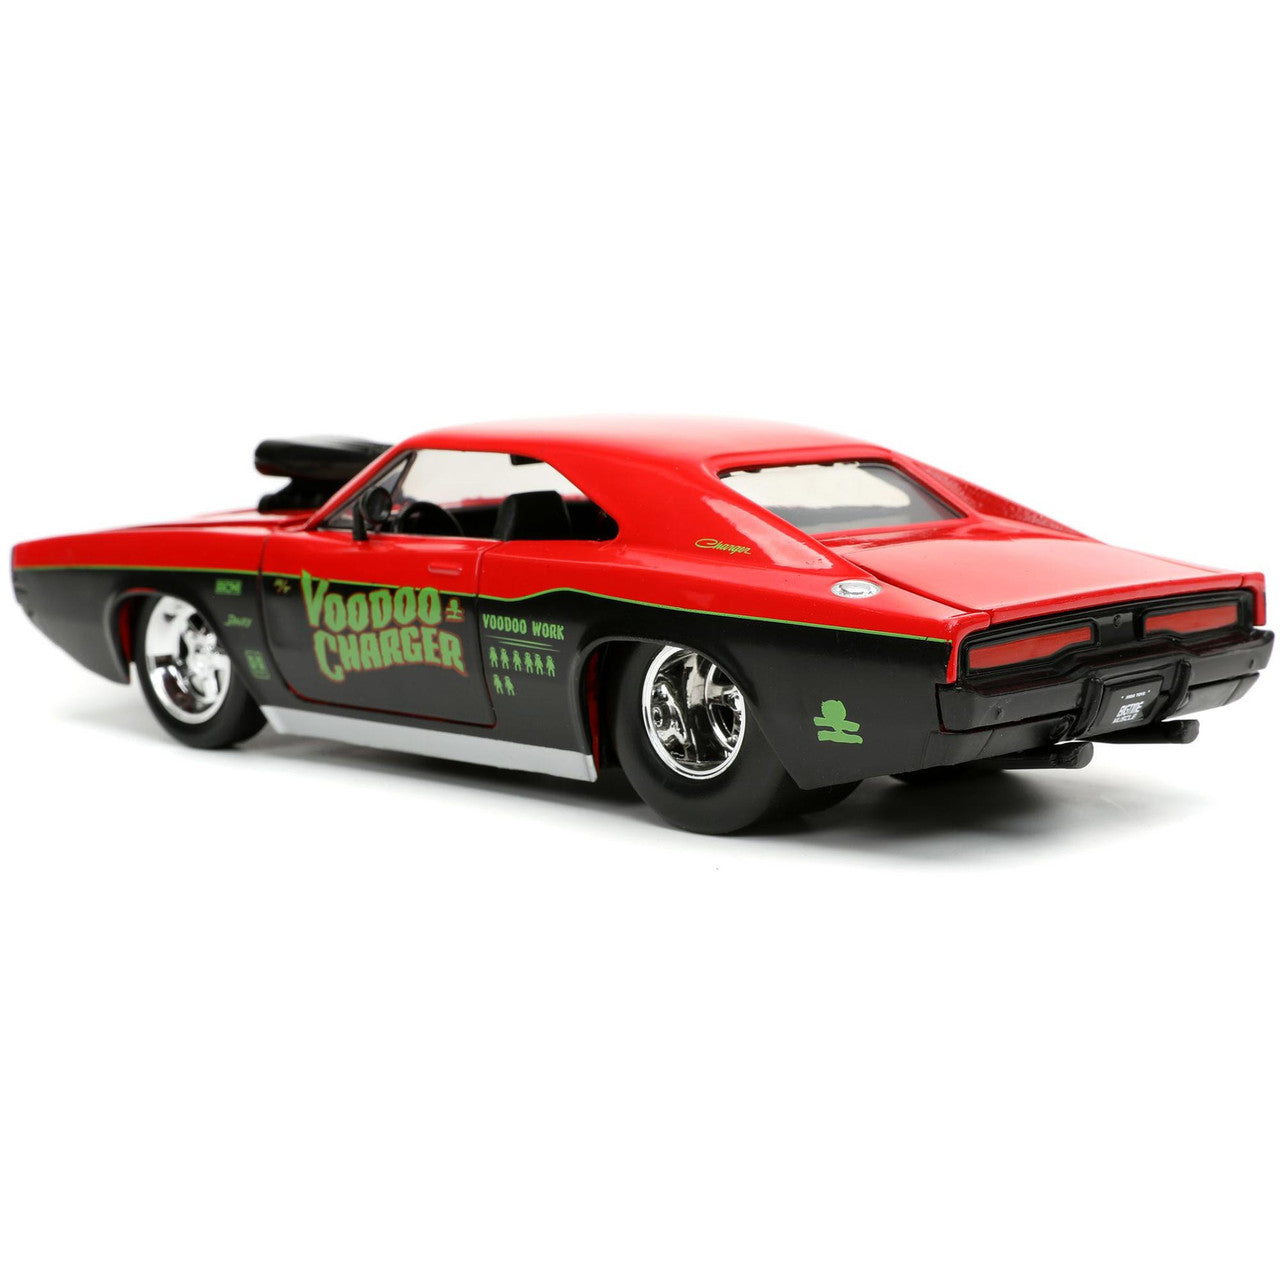 1970 VooDoo Dodge Charger R/T - BTM 1:24 Scale Diecast Replica Model by Jada Toys